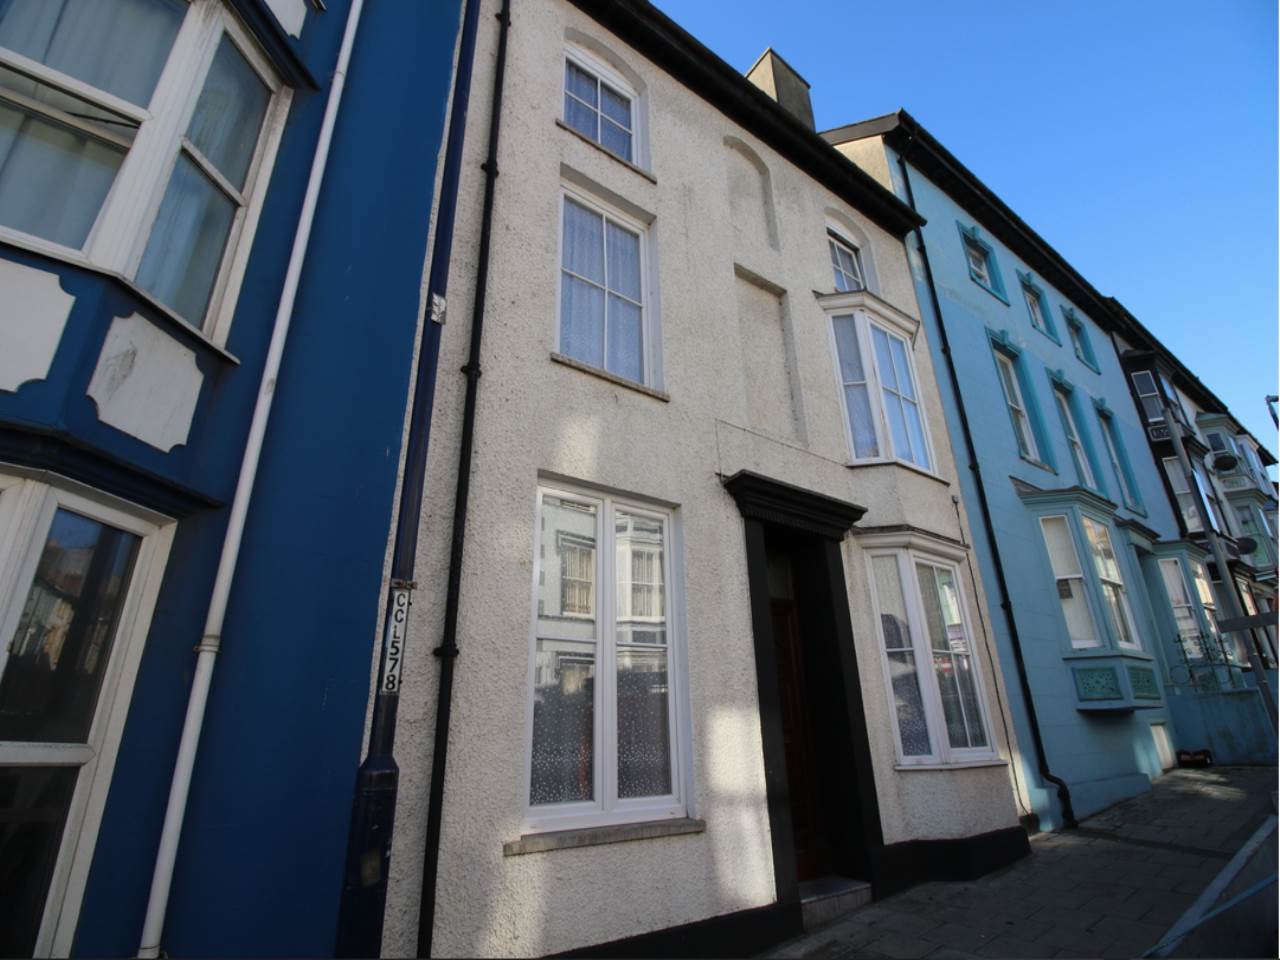 9 bed house for sale in Bridge Street, Aberystwyth 0